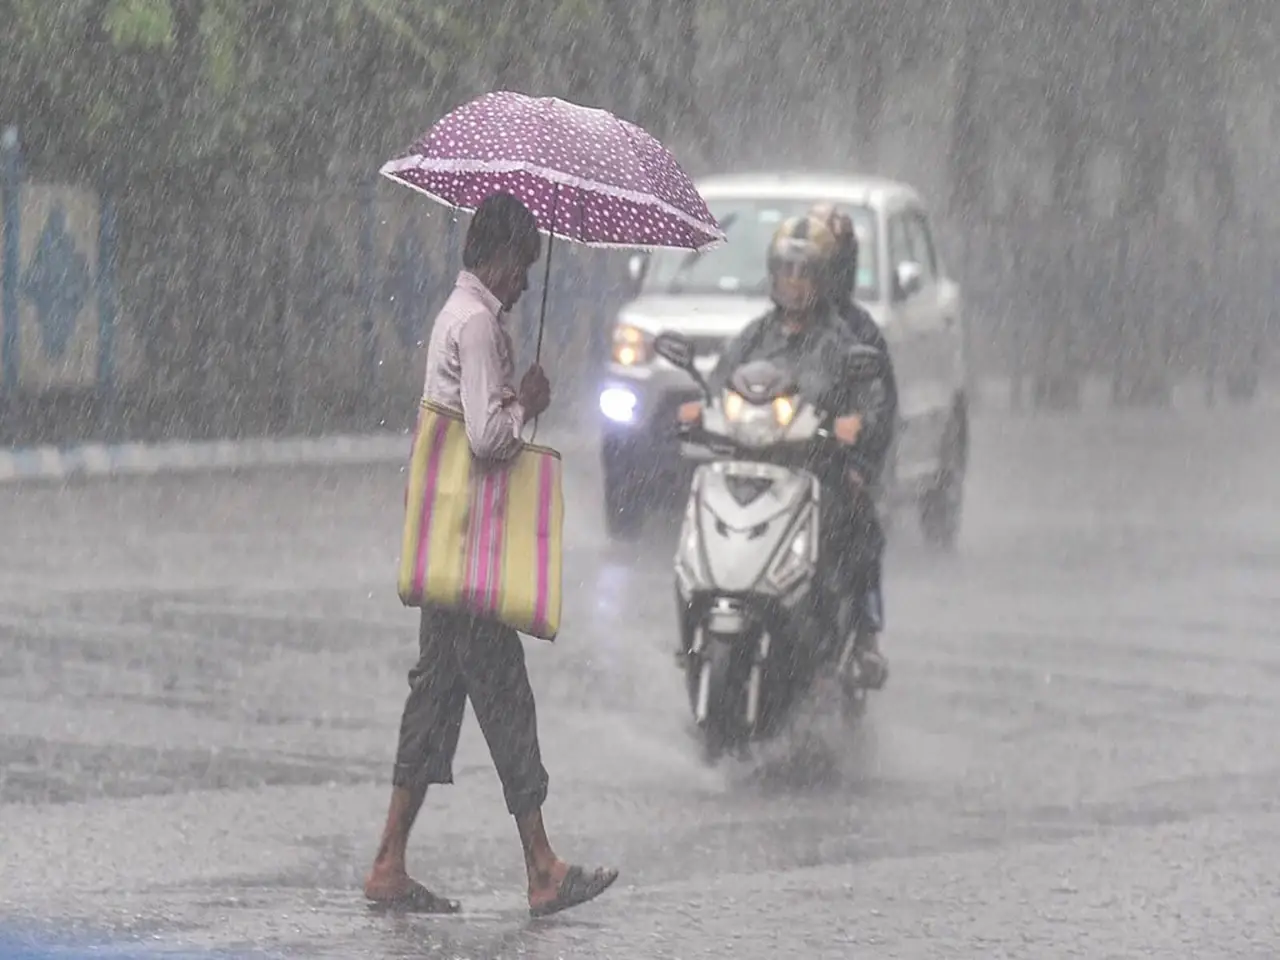 The national capital is likely to experience generally cloudy with spells of sunshine rainfall during the coming days, according to an IMD advisory.